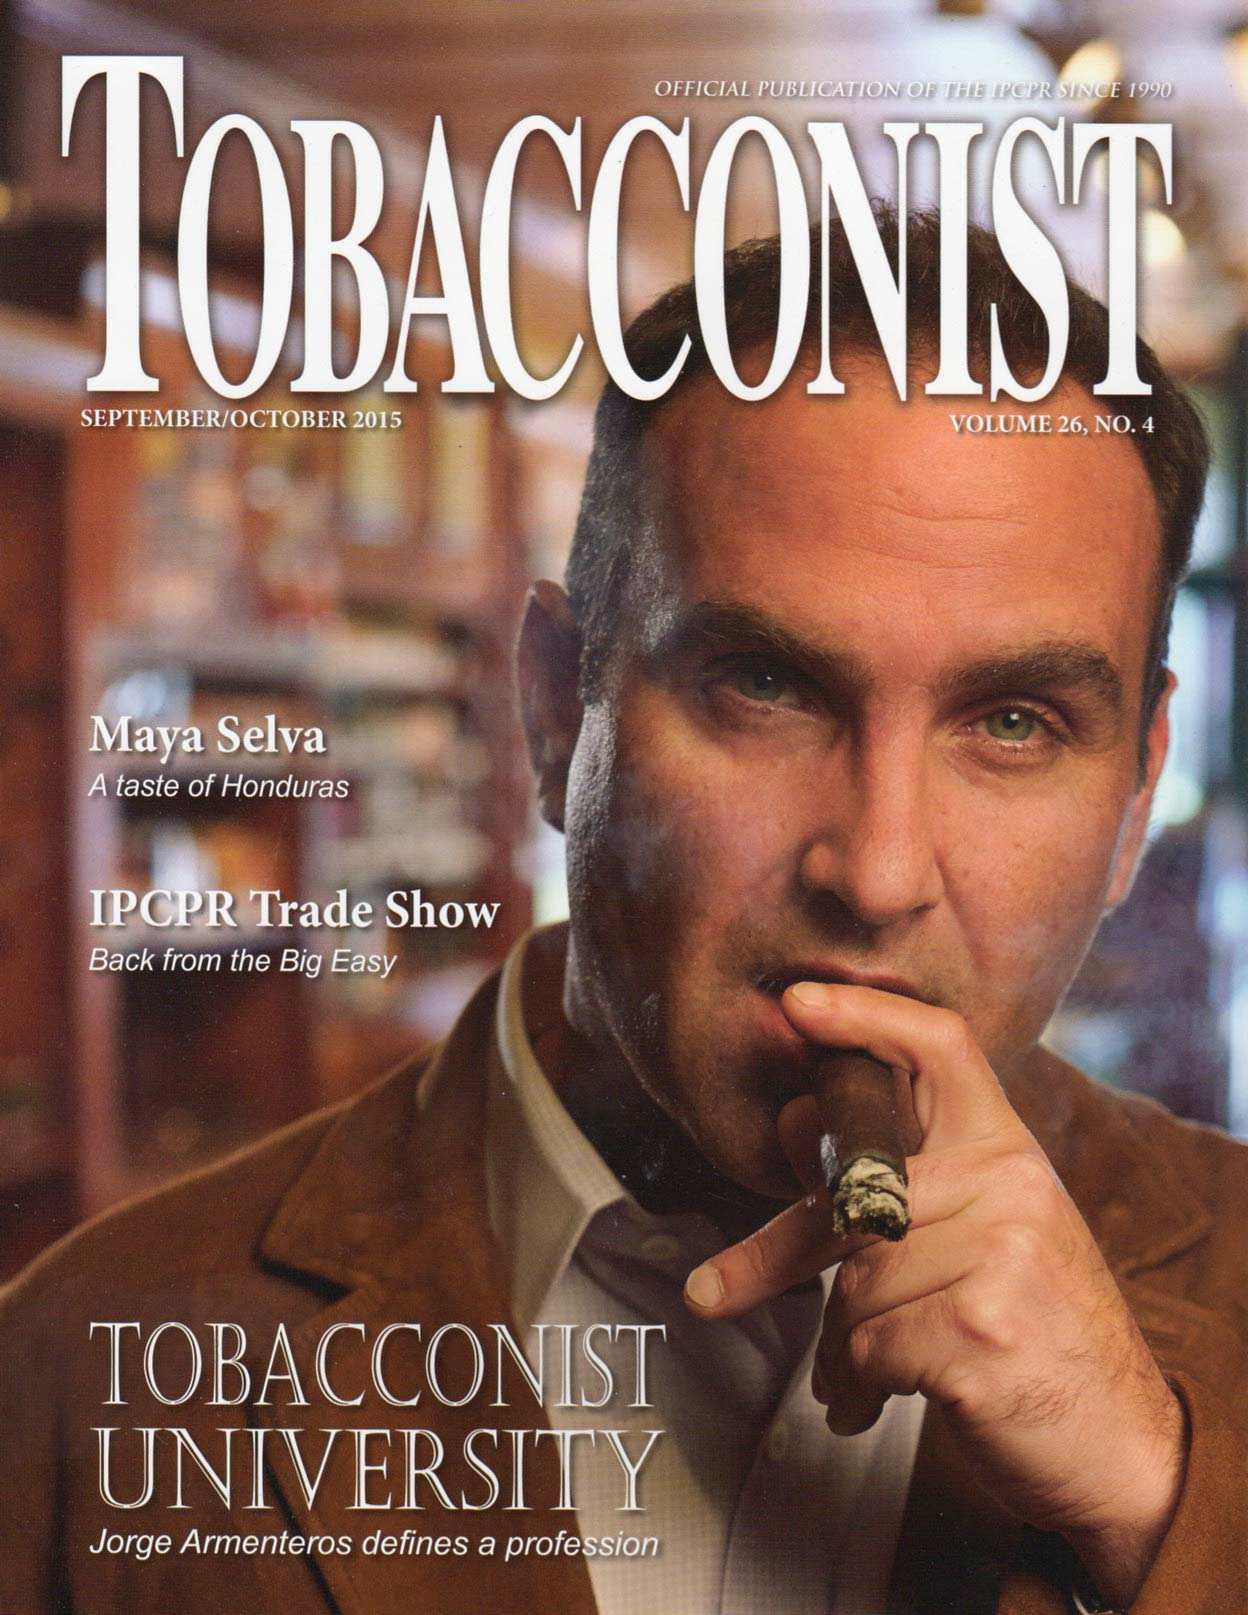 Jorge Armenteros for the cover of Tobacconist Magazine, Sept/Oct 2015 issue. Princeton, NJ.